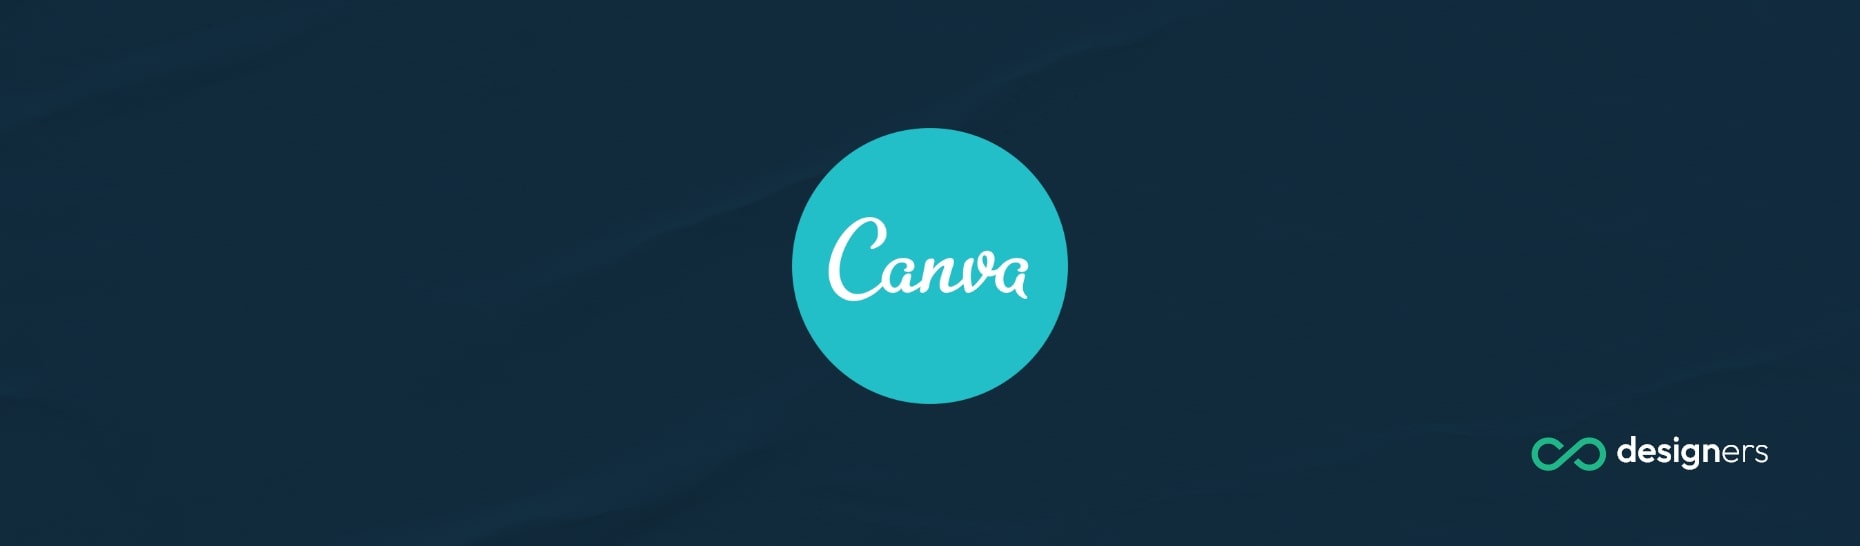 What Does Canva Mean?